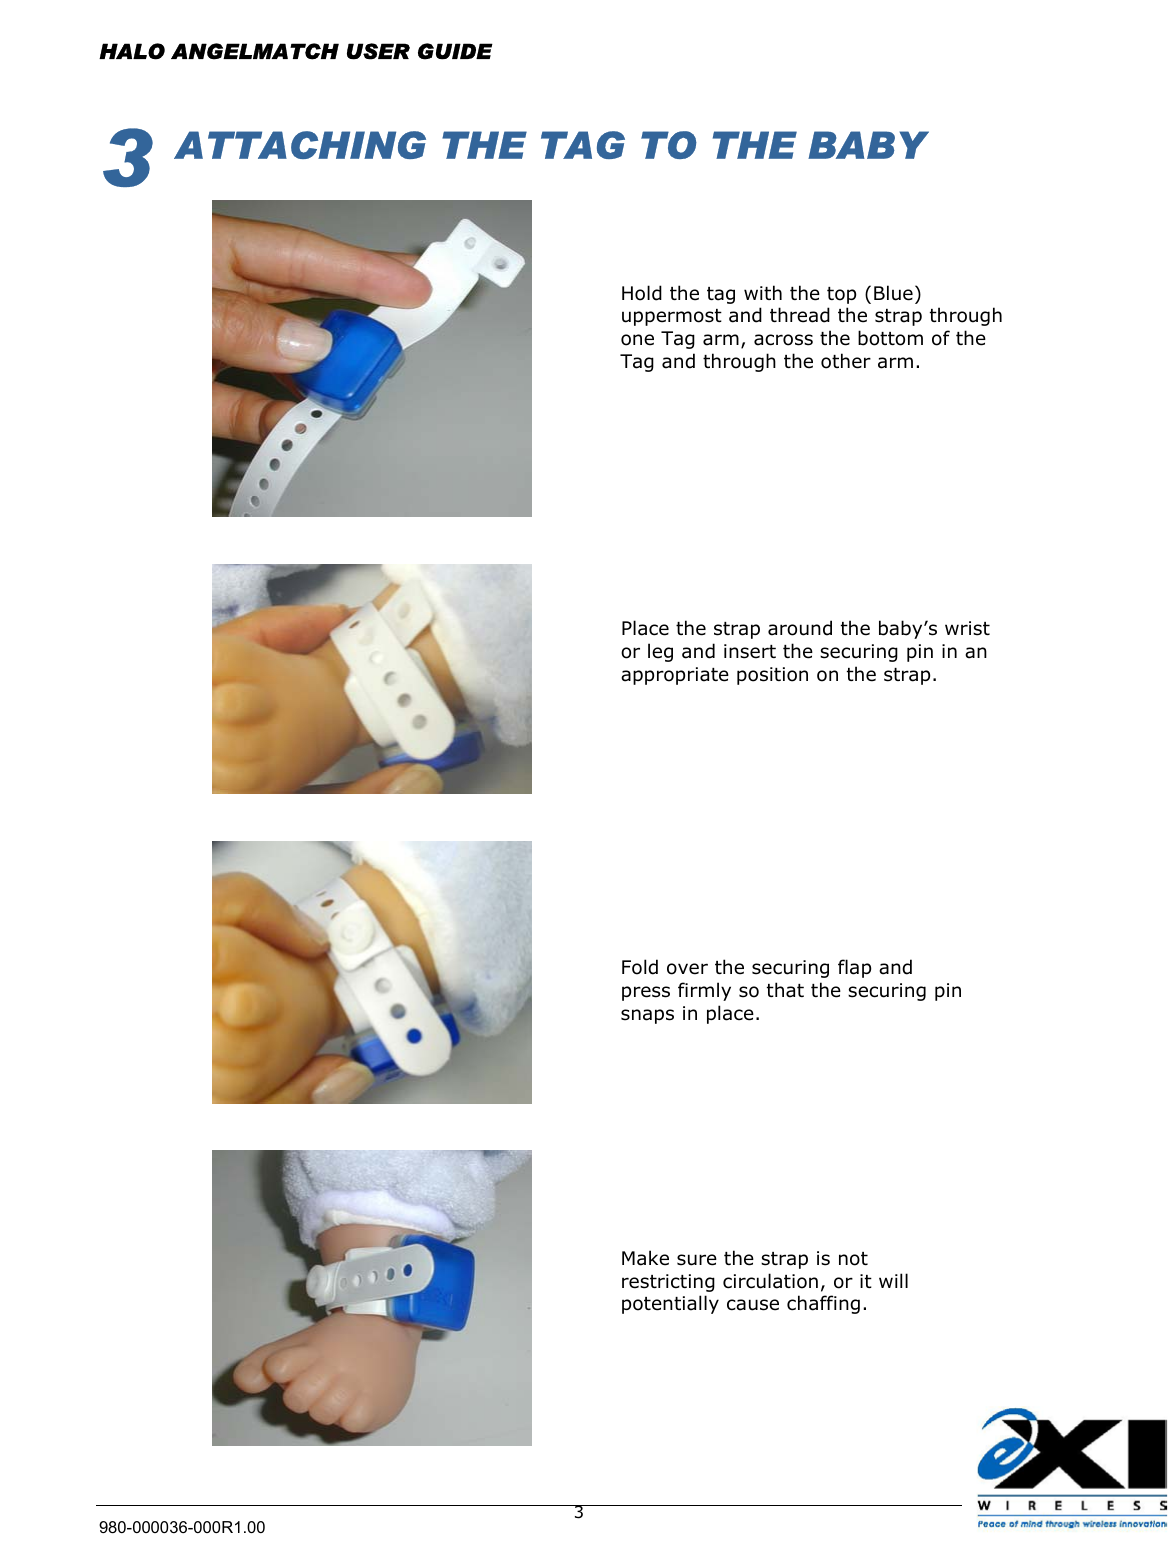  HALO ANGELMATCH USER GUIDE 980-000036-000R1.00    33  ATTACHING THE TAG TO THE BABY         Hold the tag with the top (Blue) uppermost and thread the strap through one Tag arm, across the bottom of the Tag and through the other arm.  Place the strap around the baby’s wrist or leg and insert the securing pin in an appropriate position on the strap. Fold over the securing flap and press firmly so that the securing pin snaps in place. Make sure the strap is not restricting circulation, or it will potentially cause chaffing.   